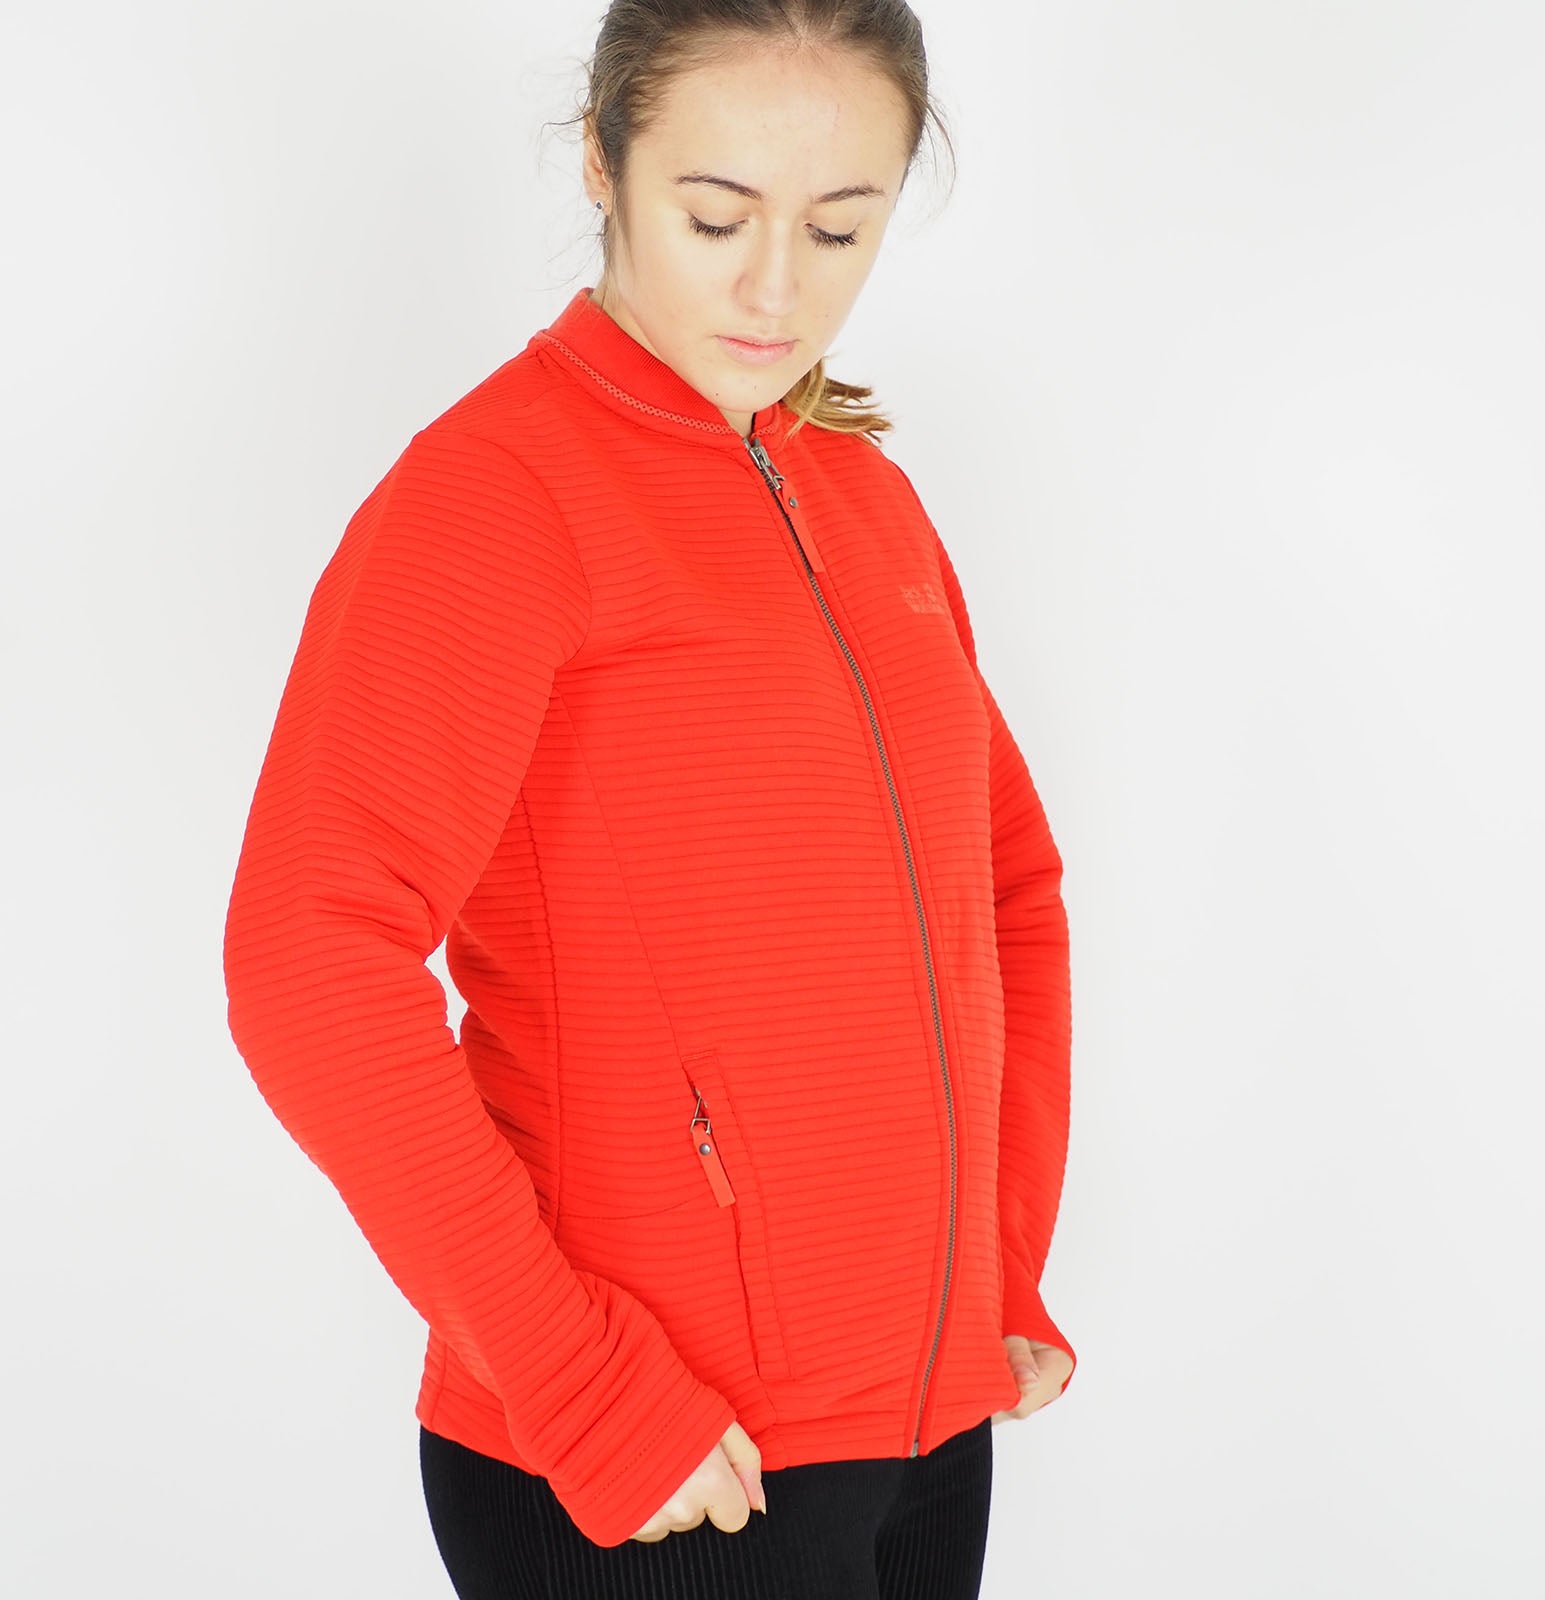 Womens Jack Wolfskin Modesto 1706241 Volcano Red Zip Up Breathable Jacket